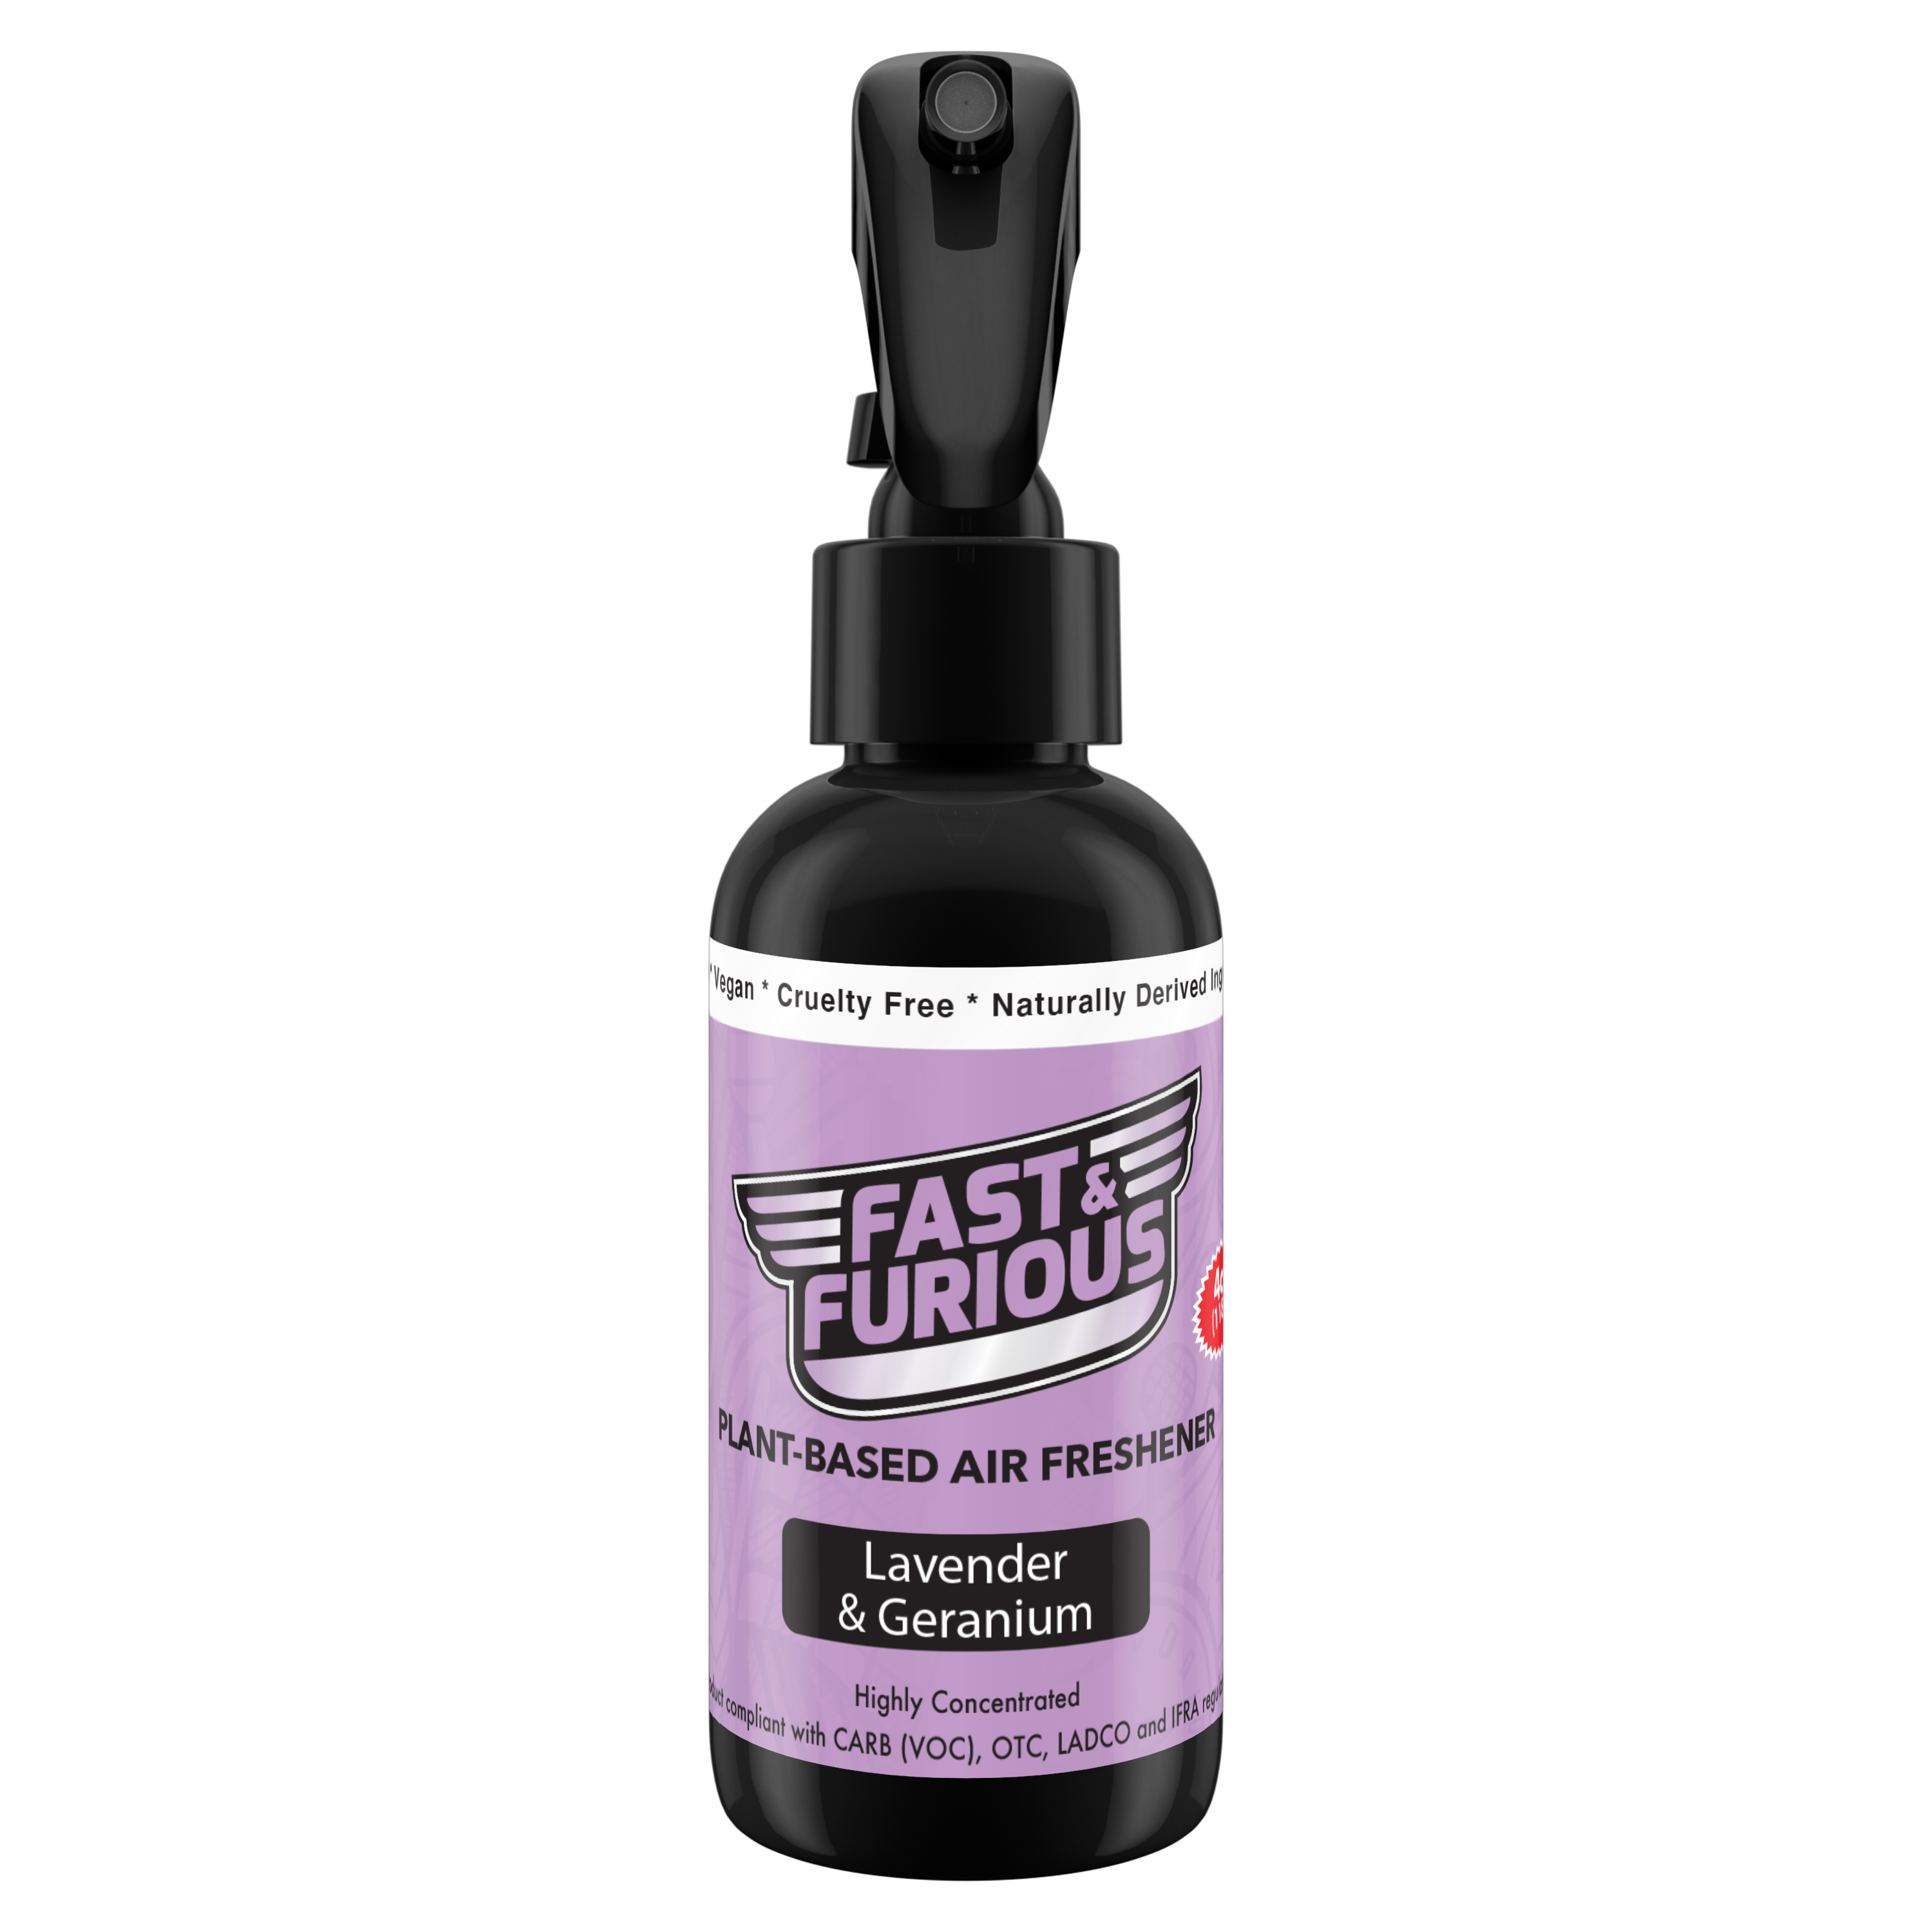 Fast and Furious Plant-Based Air Freshener - Lavender & Geranium Scent Size: 4oz